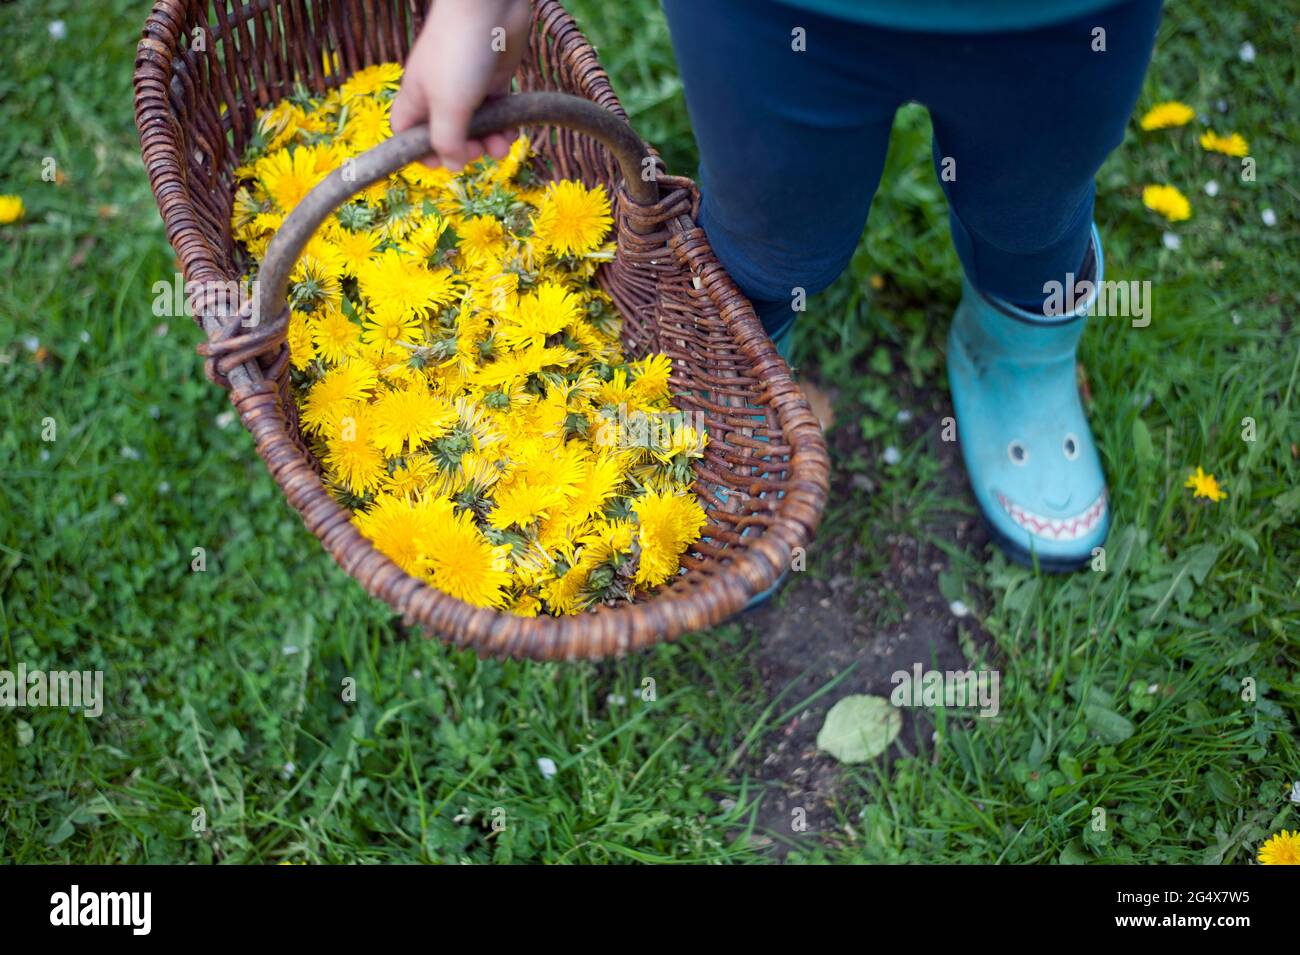 Girl holding basket of yellow dandelion flowers while standing in garden Stock Photo